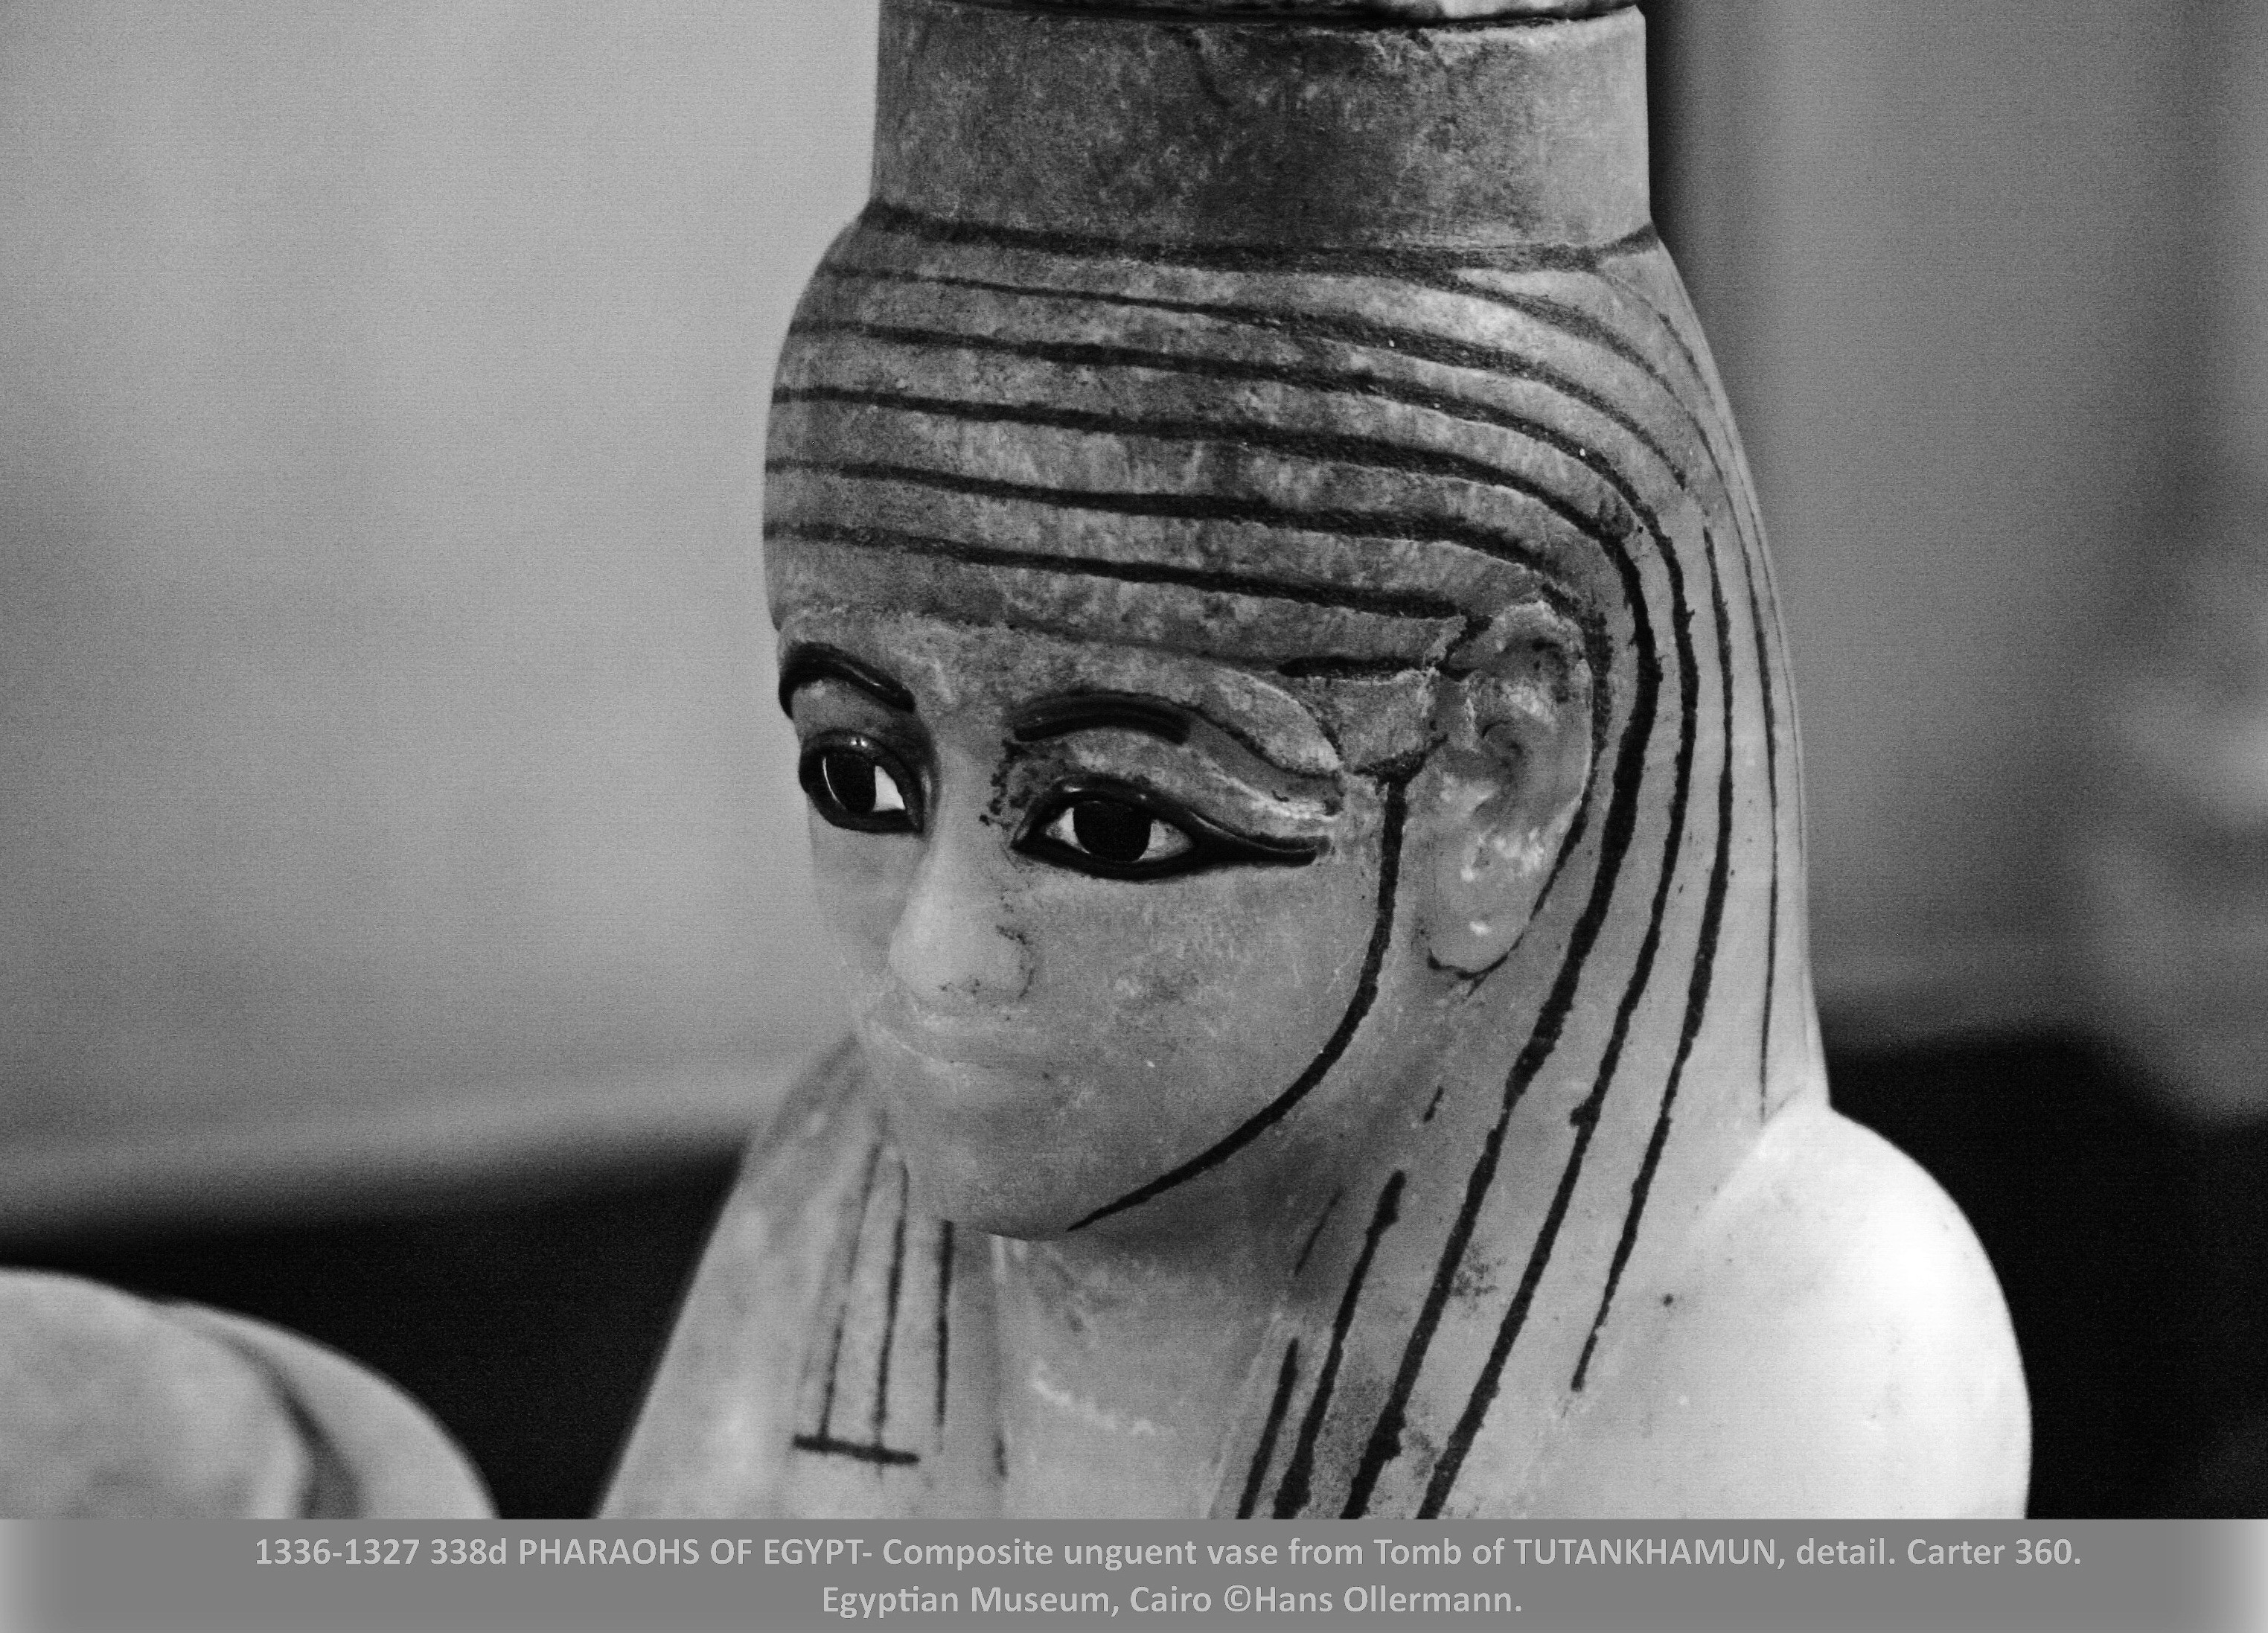 Composite unguent vase from Tomb of TUTANKHAMUN, detail. Carter 360. Egyptian Museum, Cairo :copyright:Hans Ollermann. Alabaster. Carter 360. Relevant Burton photo’s as found in Howard Carter Archives in the unsurpassed Griffith Institute Oxford are 1615, 1651 and 1652. JE 62113. Exh.nr. 748.